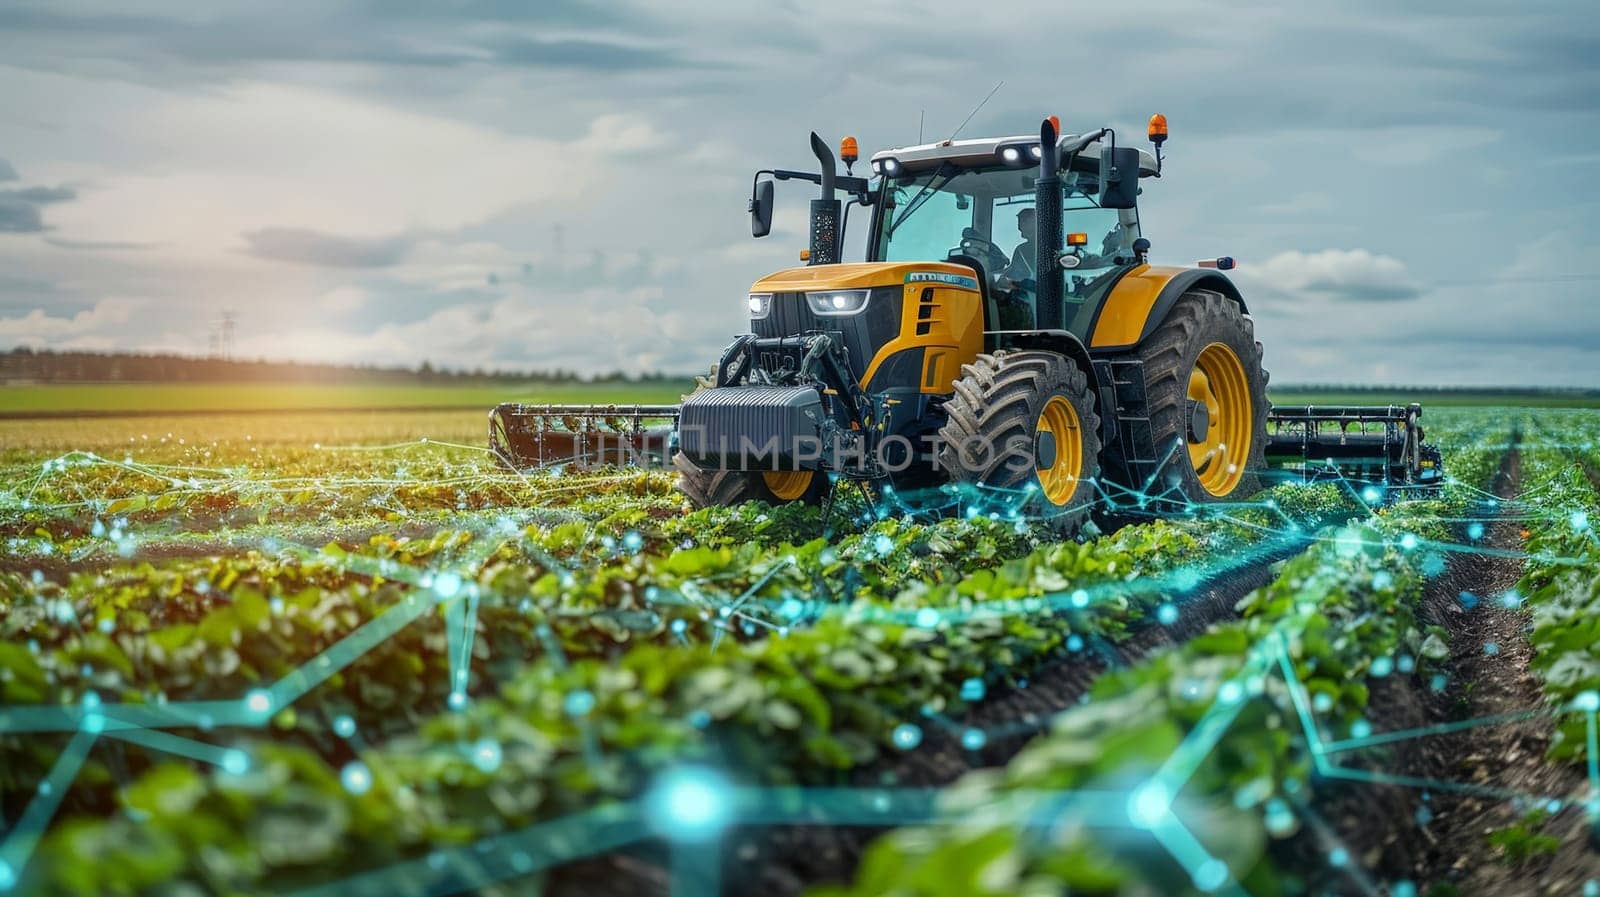 Tractor on the field, Tractors cultivate the soil in rural areas. The concept of technological agriculture.